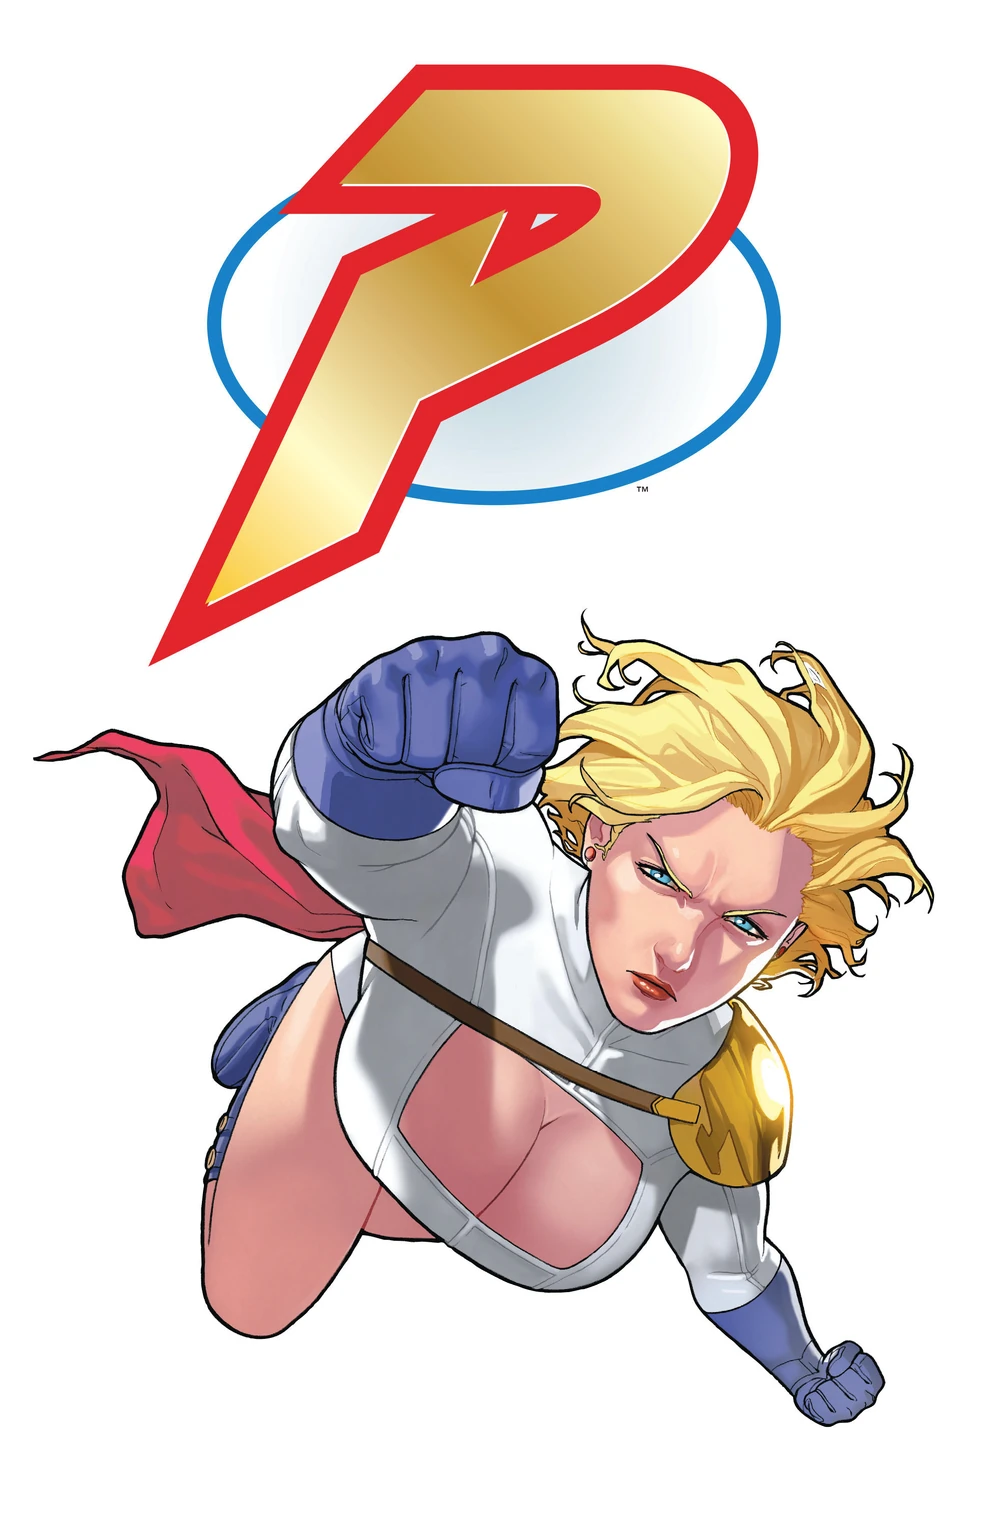 Power Girl (2009-2011) issues 13-27 review